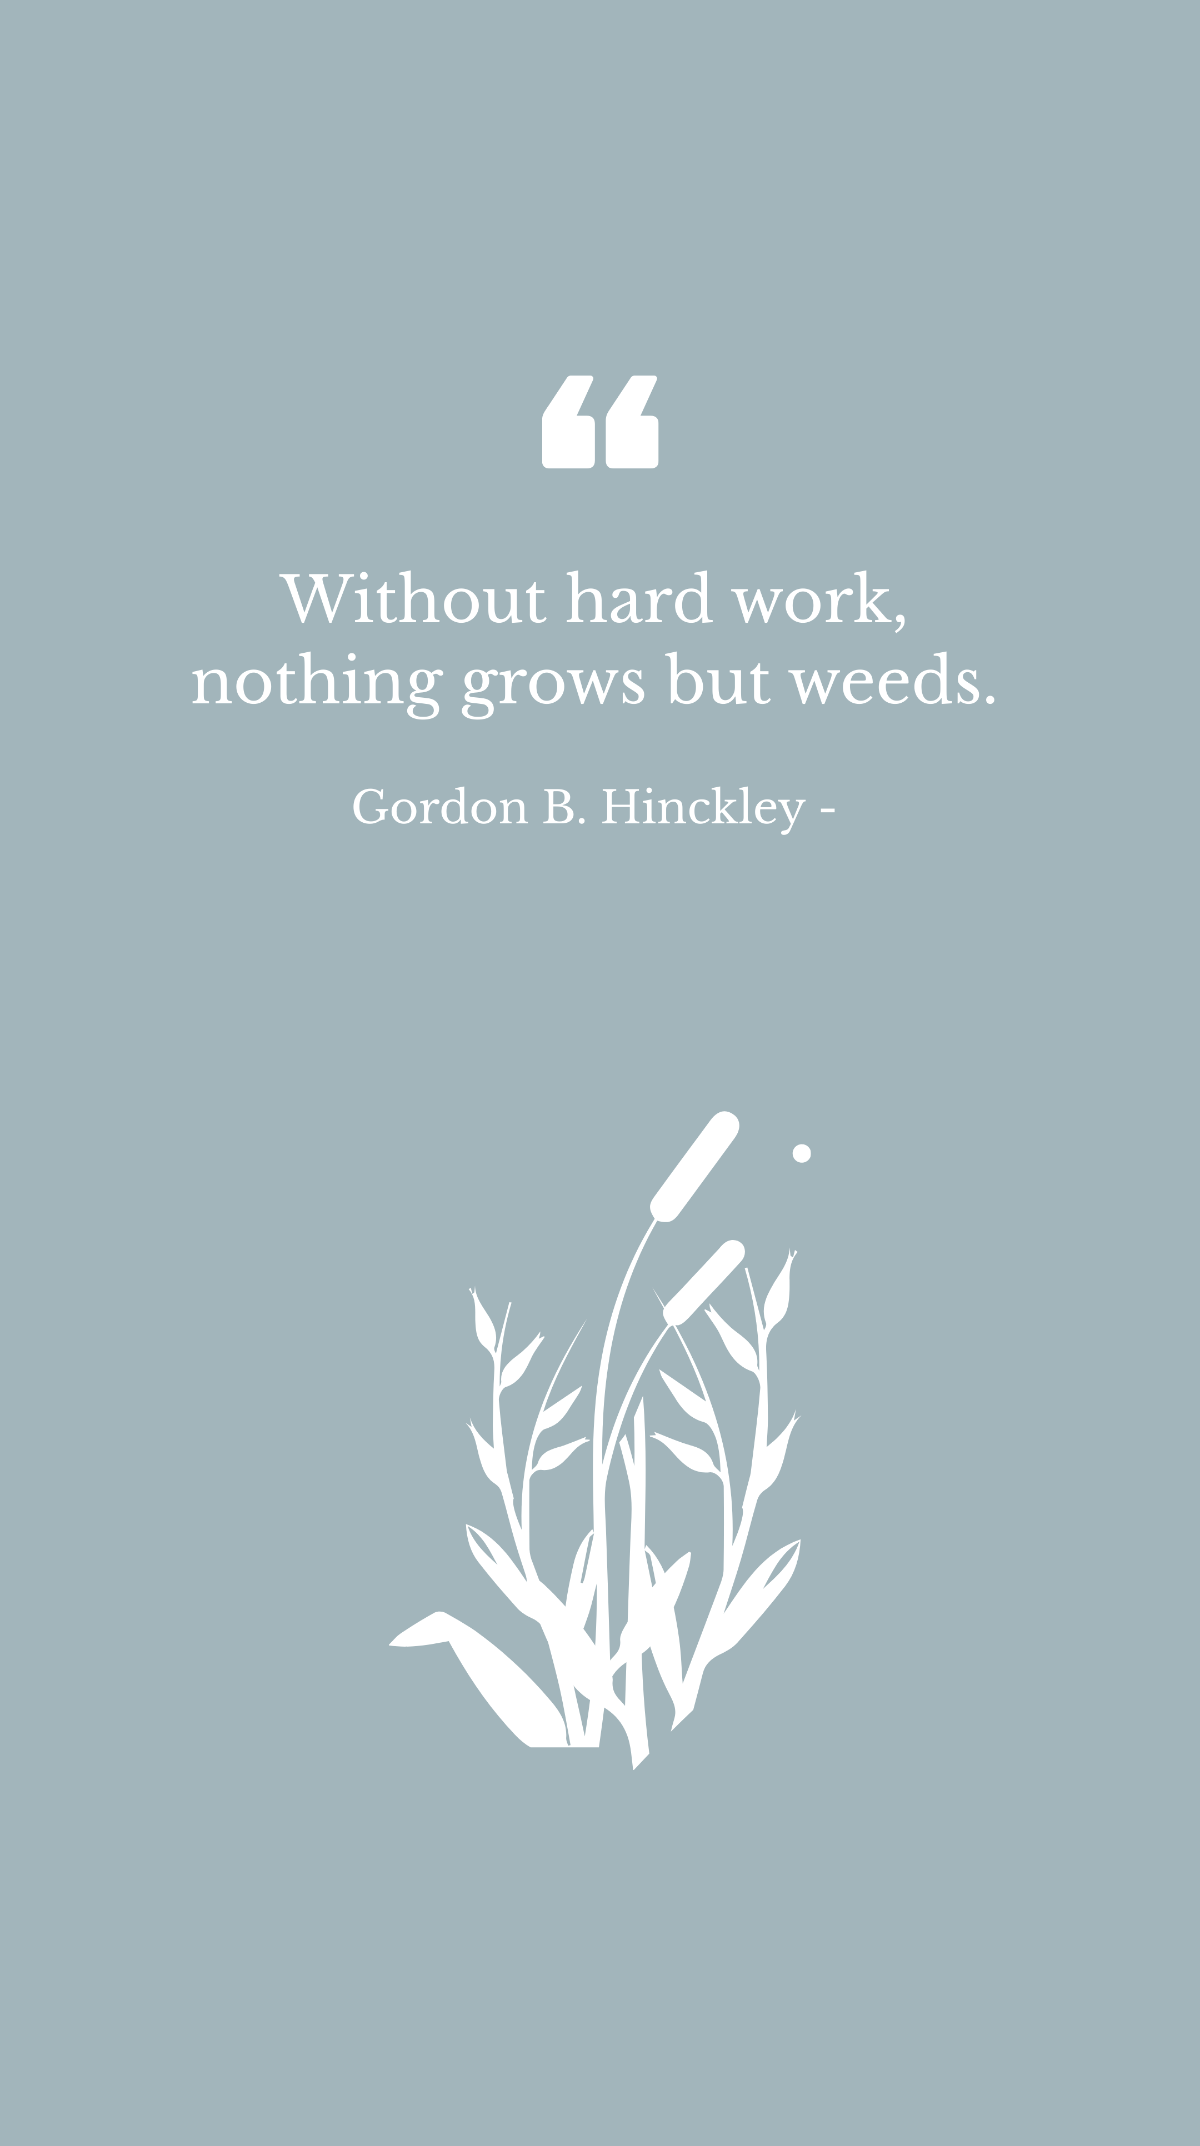 Gordon B. Hinckley - Without hard work, nothing grows but weeds. Template